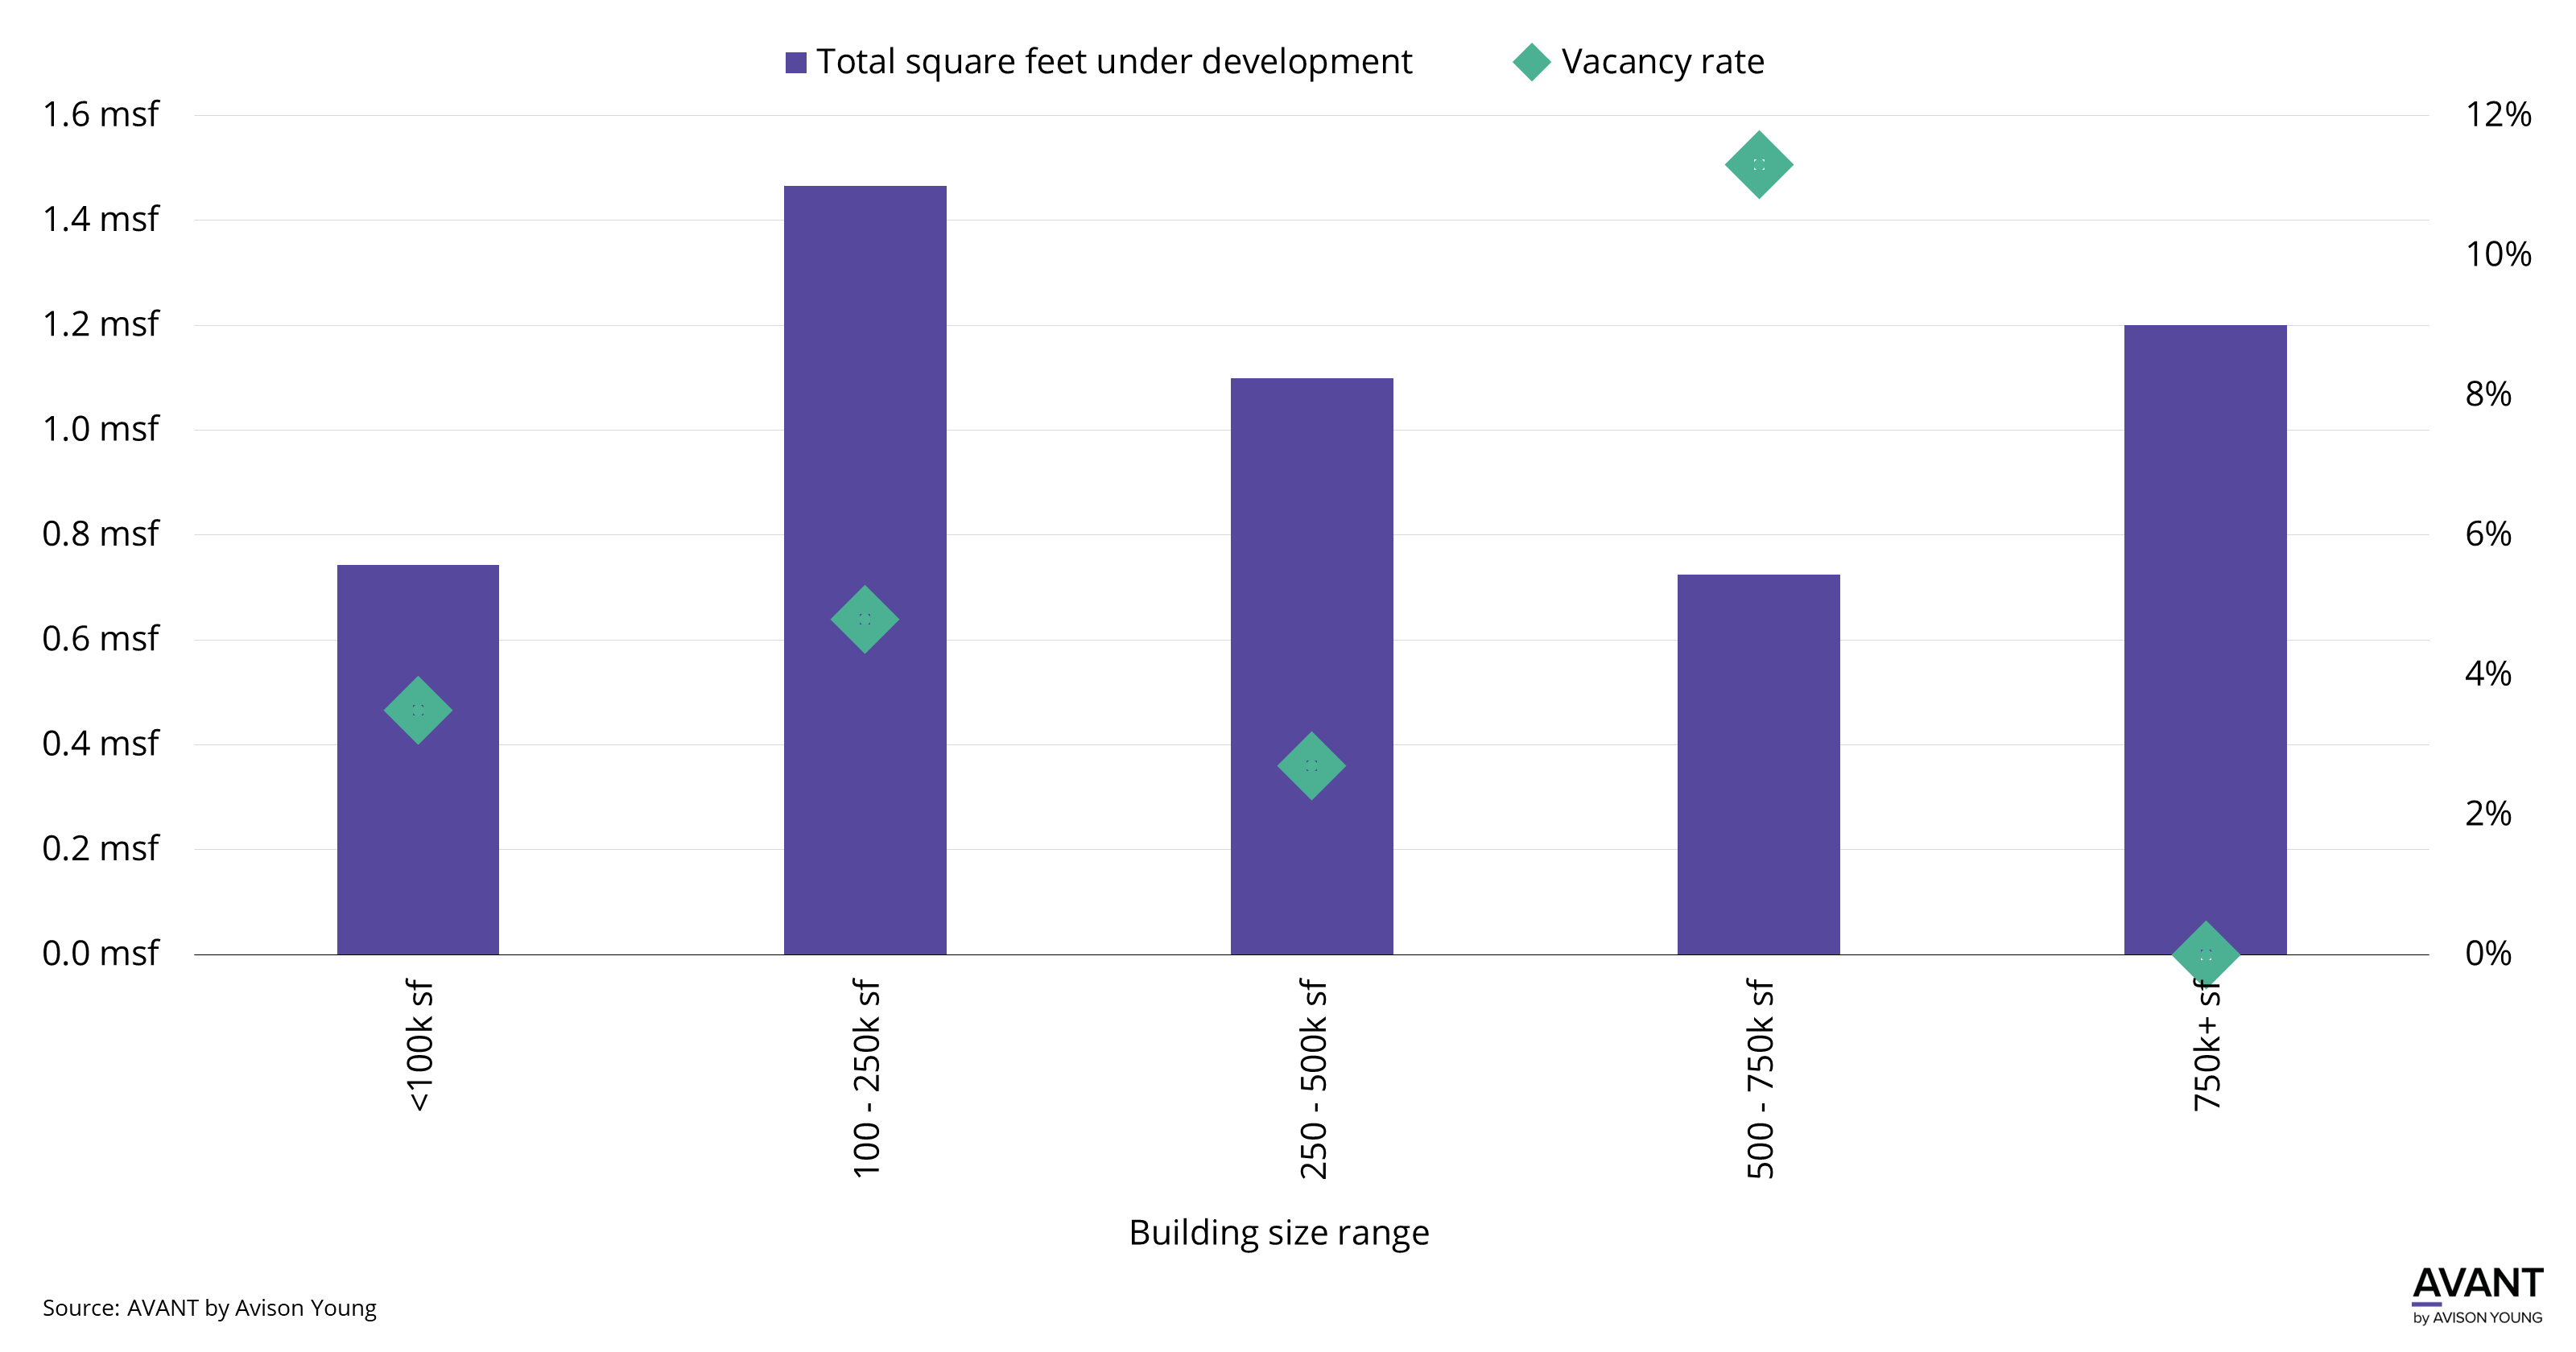 graph of total square feet under development compared to vacancy rate by building size range in Orlando industrial market